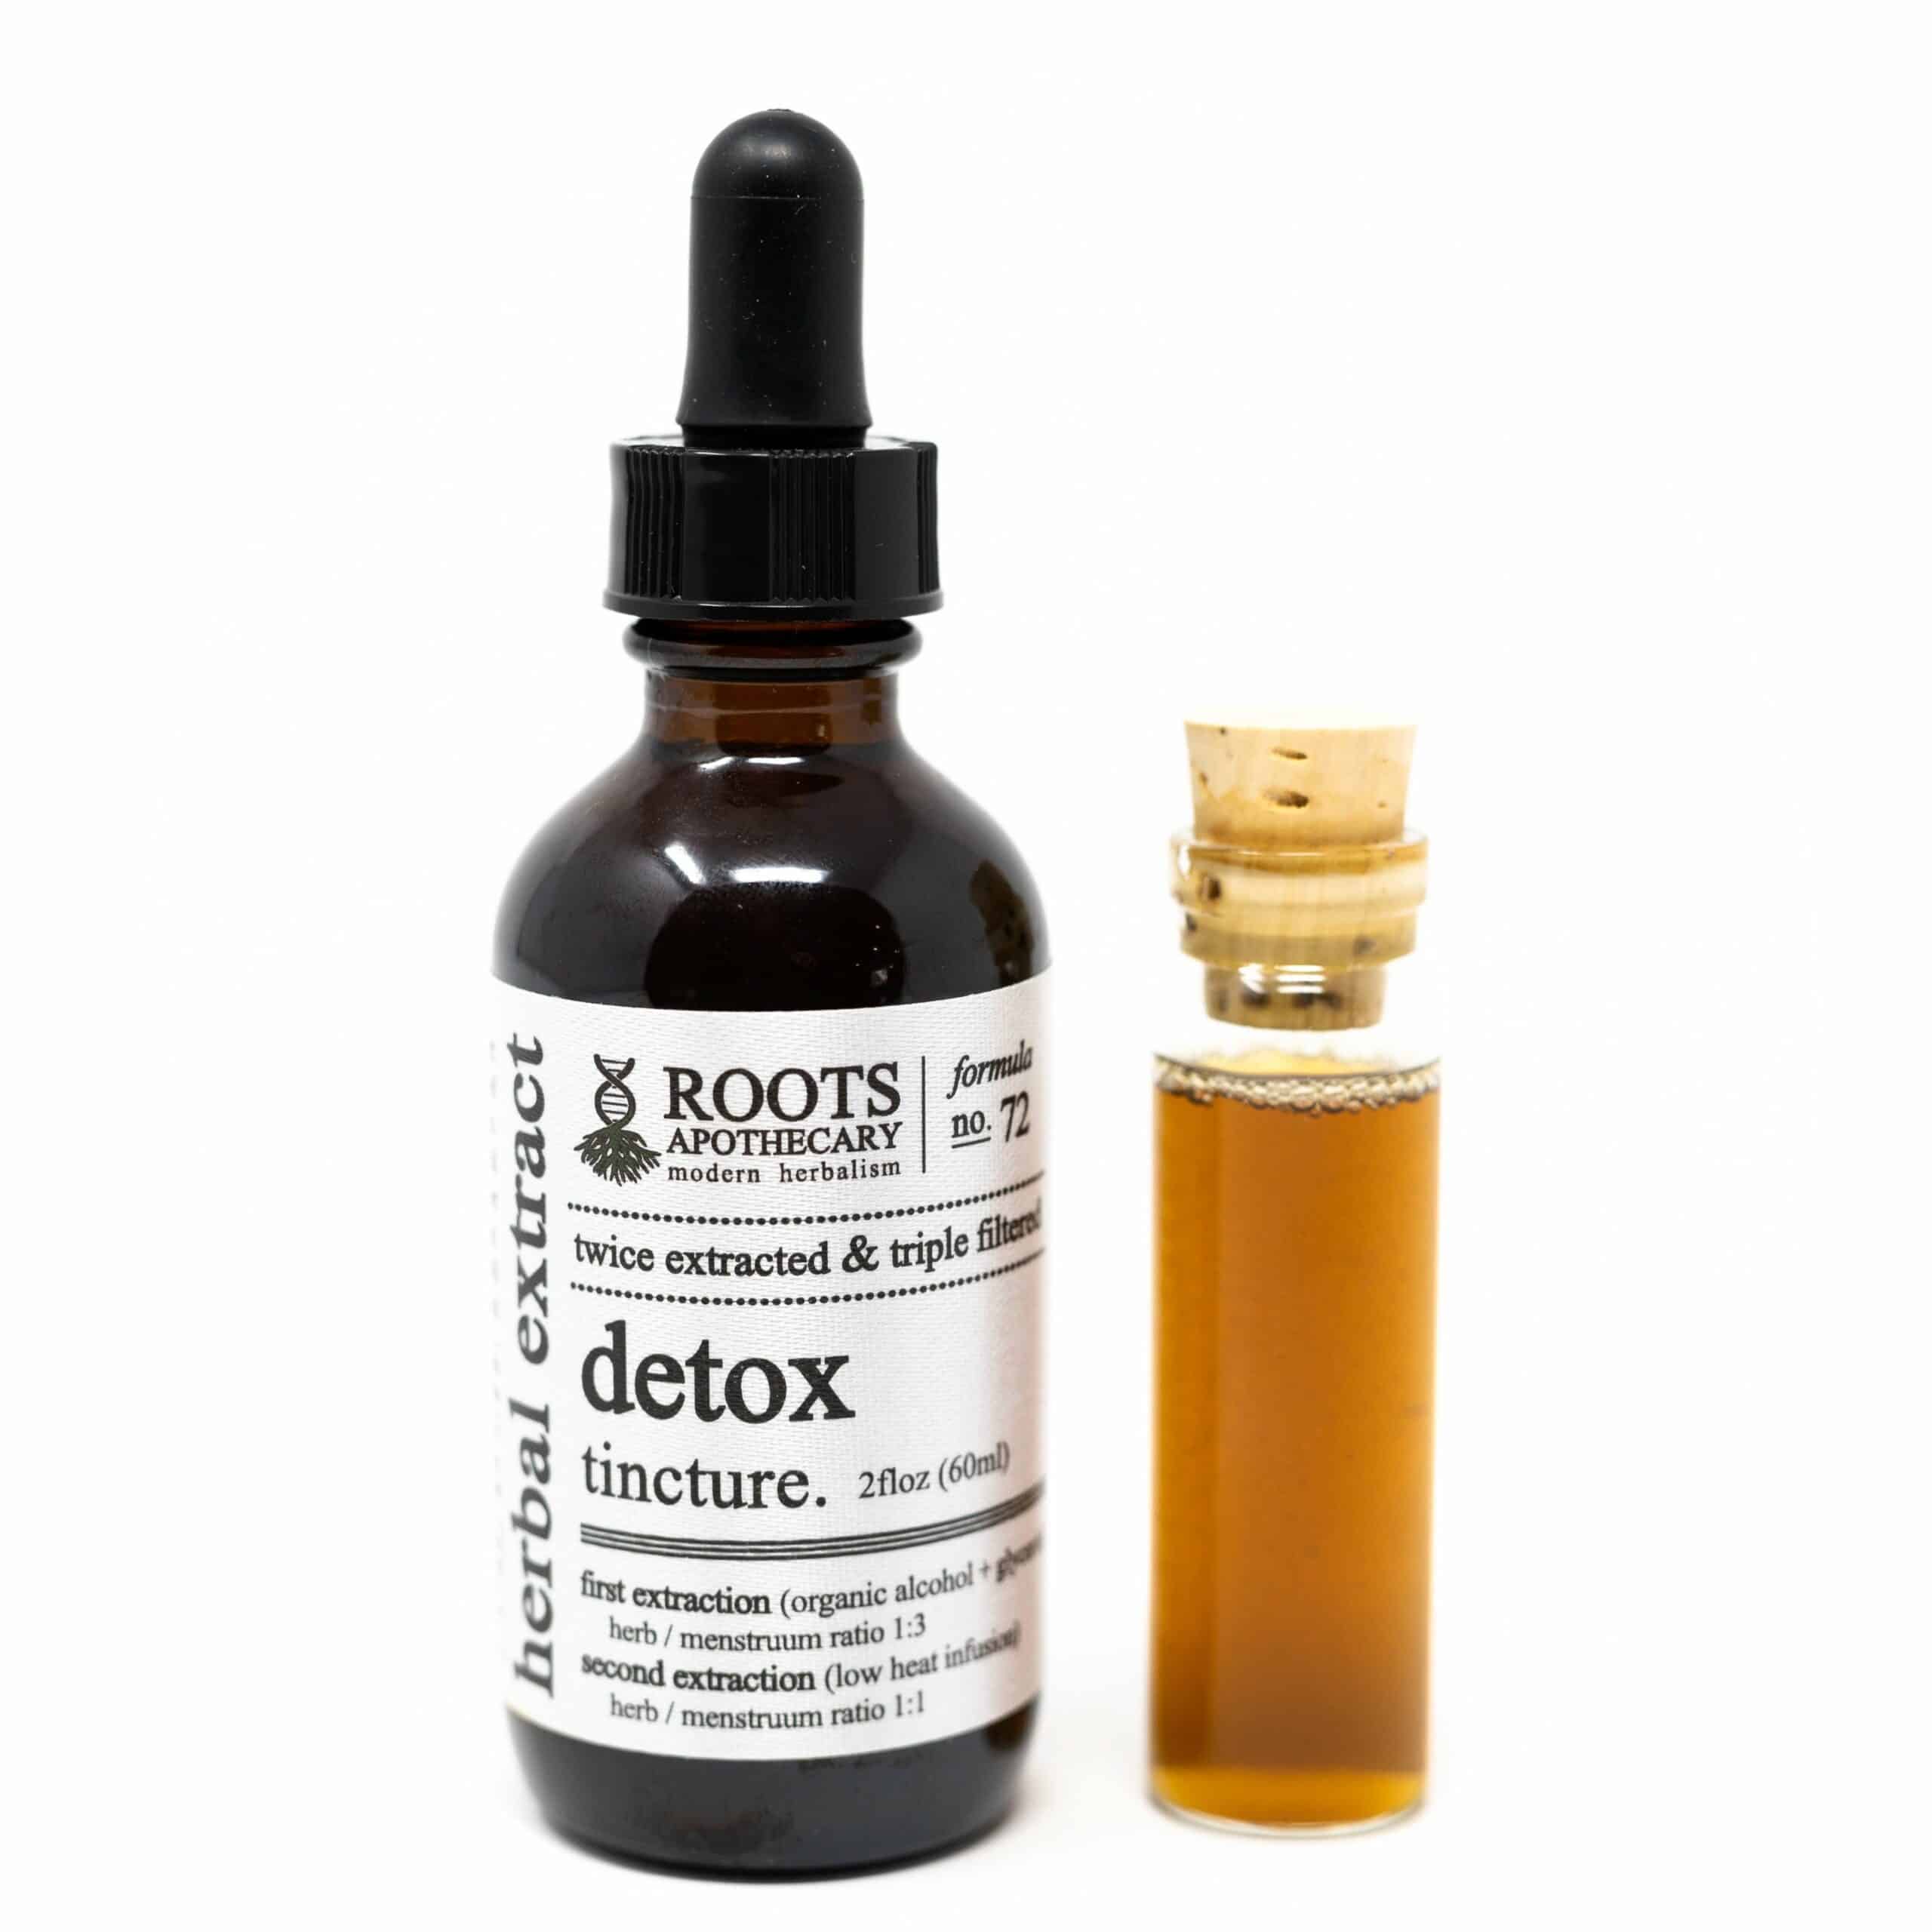 A bottle of Mushroom and Adaptogen Tincture from Root's Apothecary alongside a vial of brown liquid.